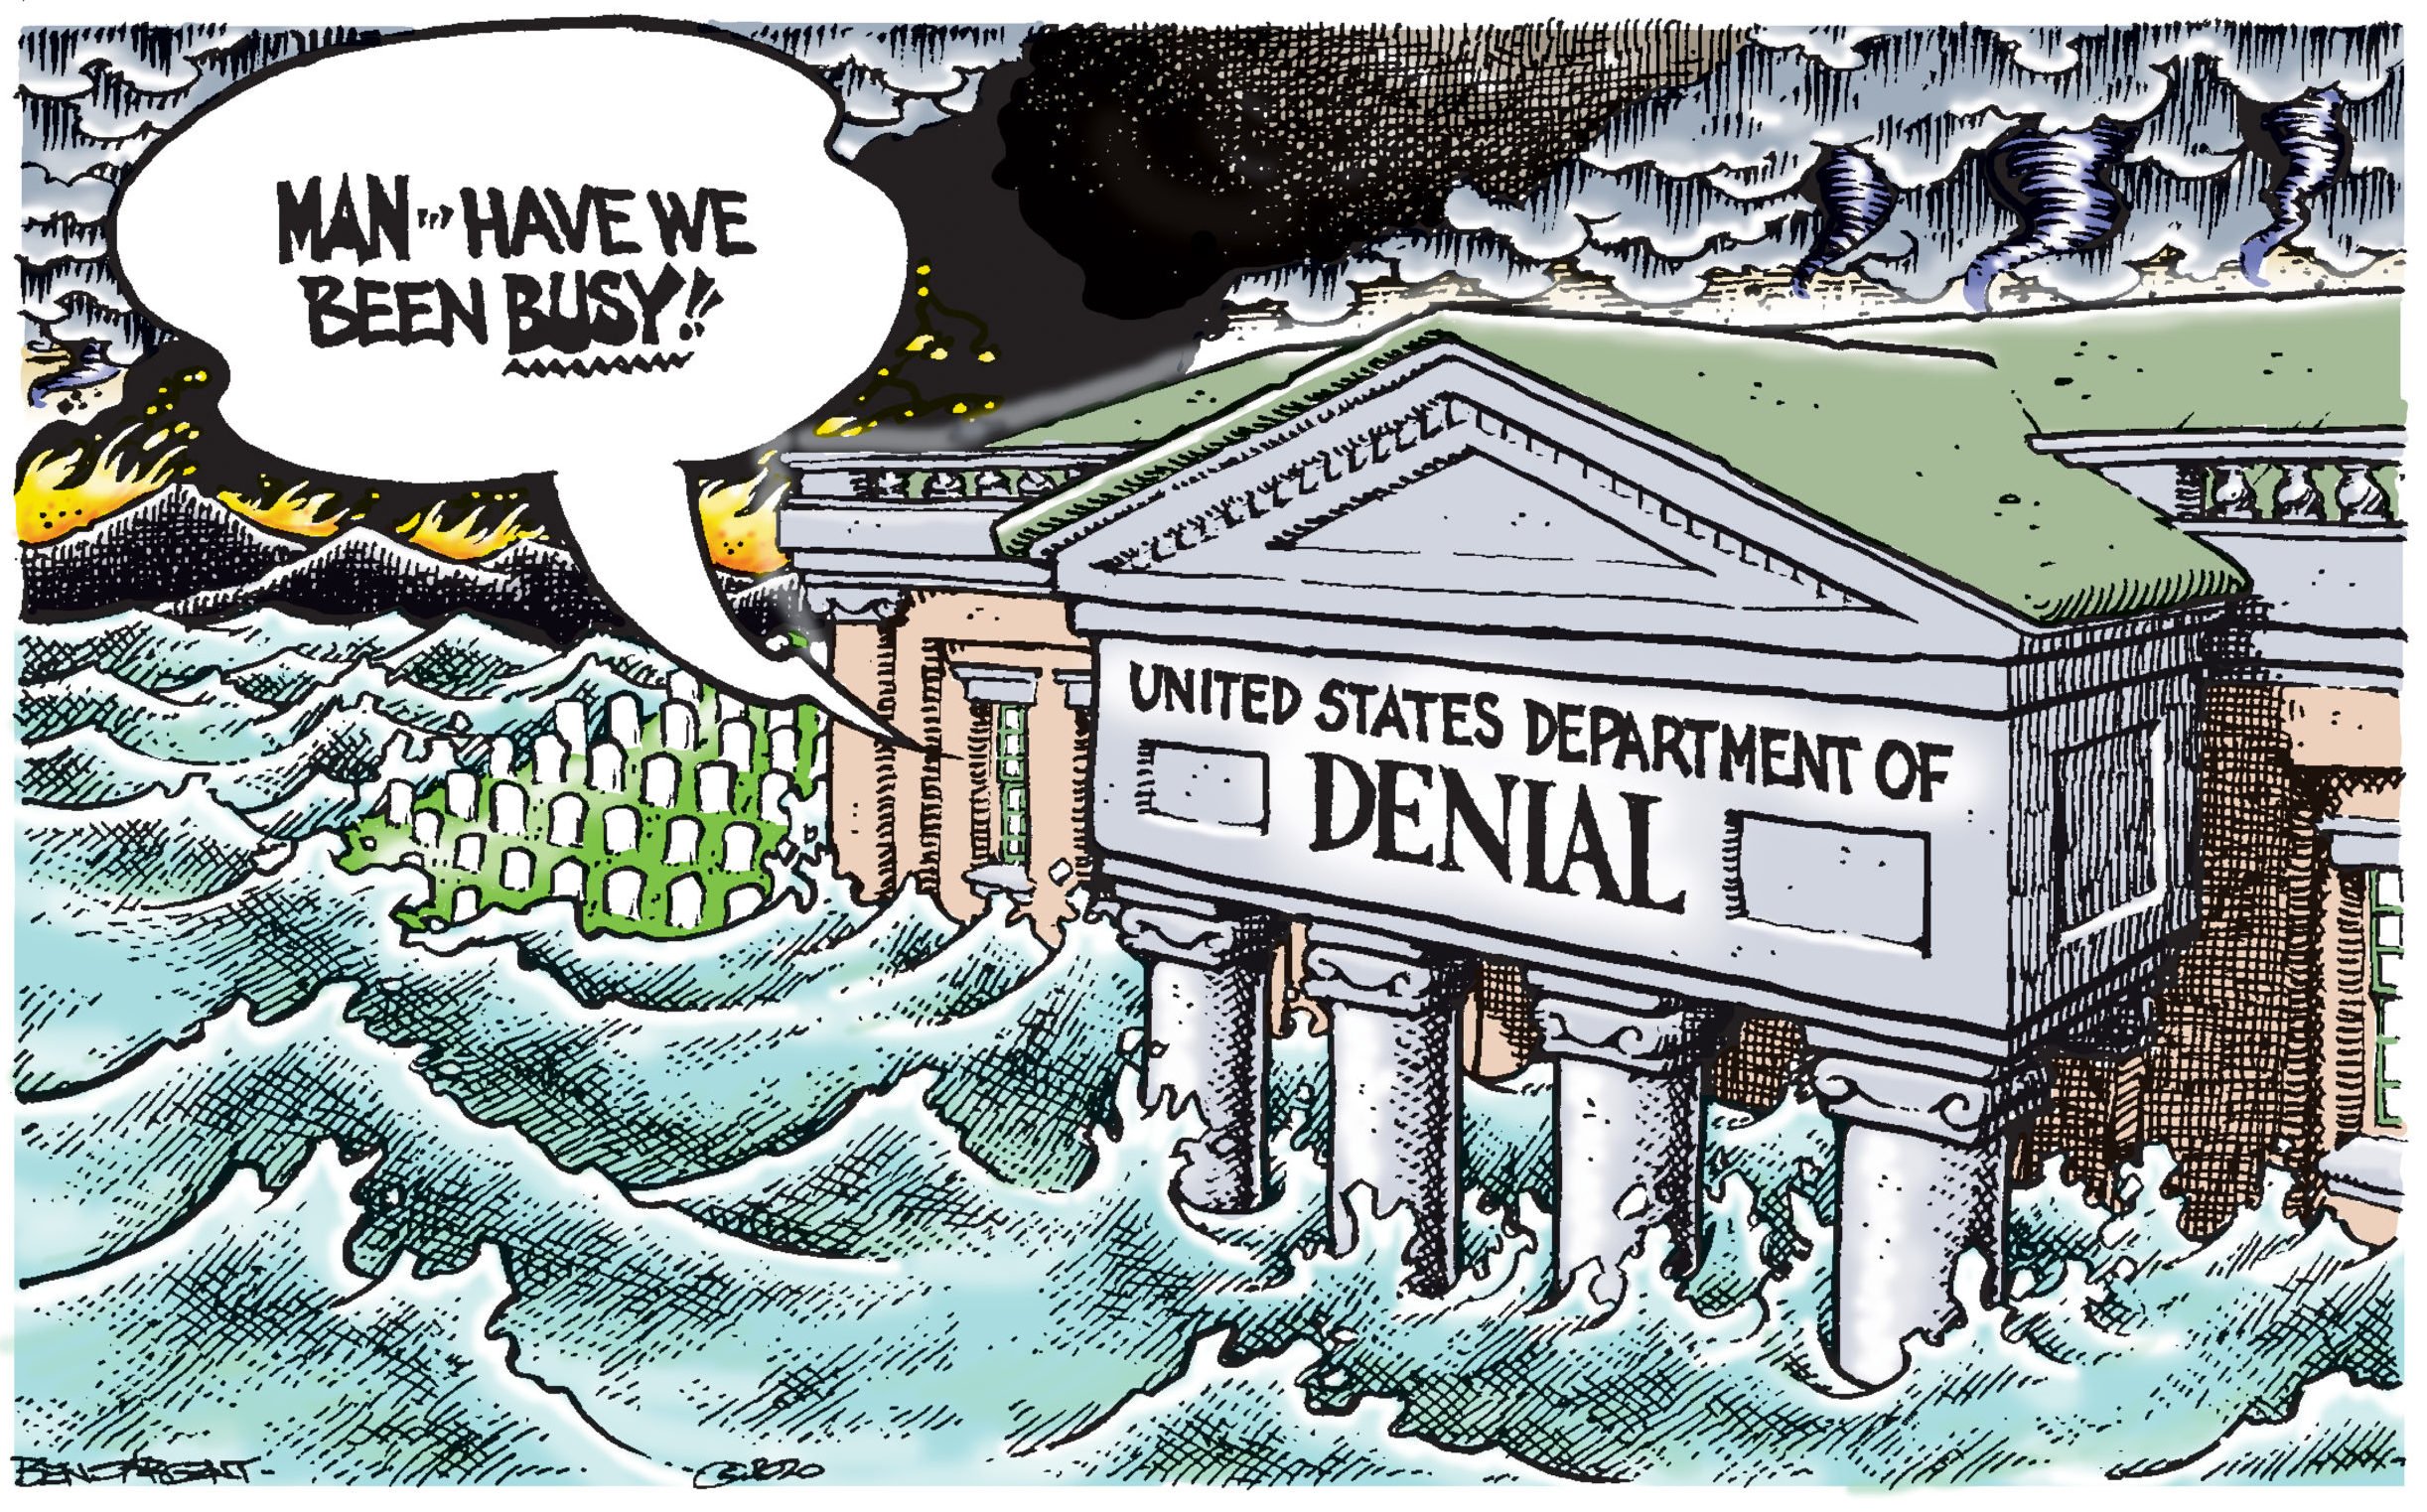 The U.S. Justice Building Renamed "United States Department of Denial" amid a flood.